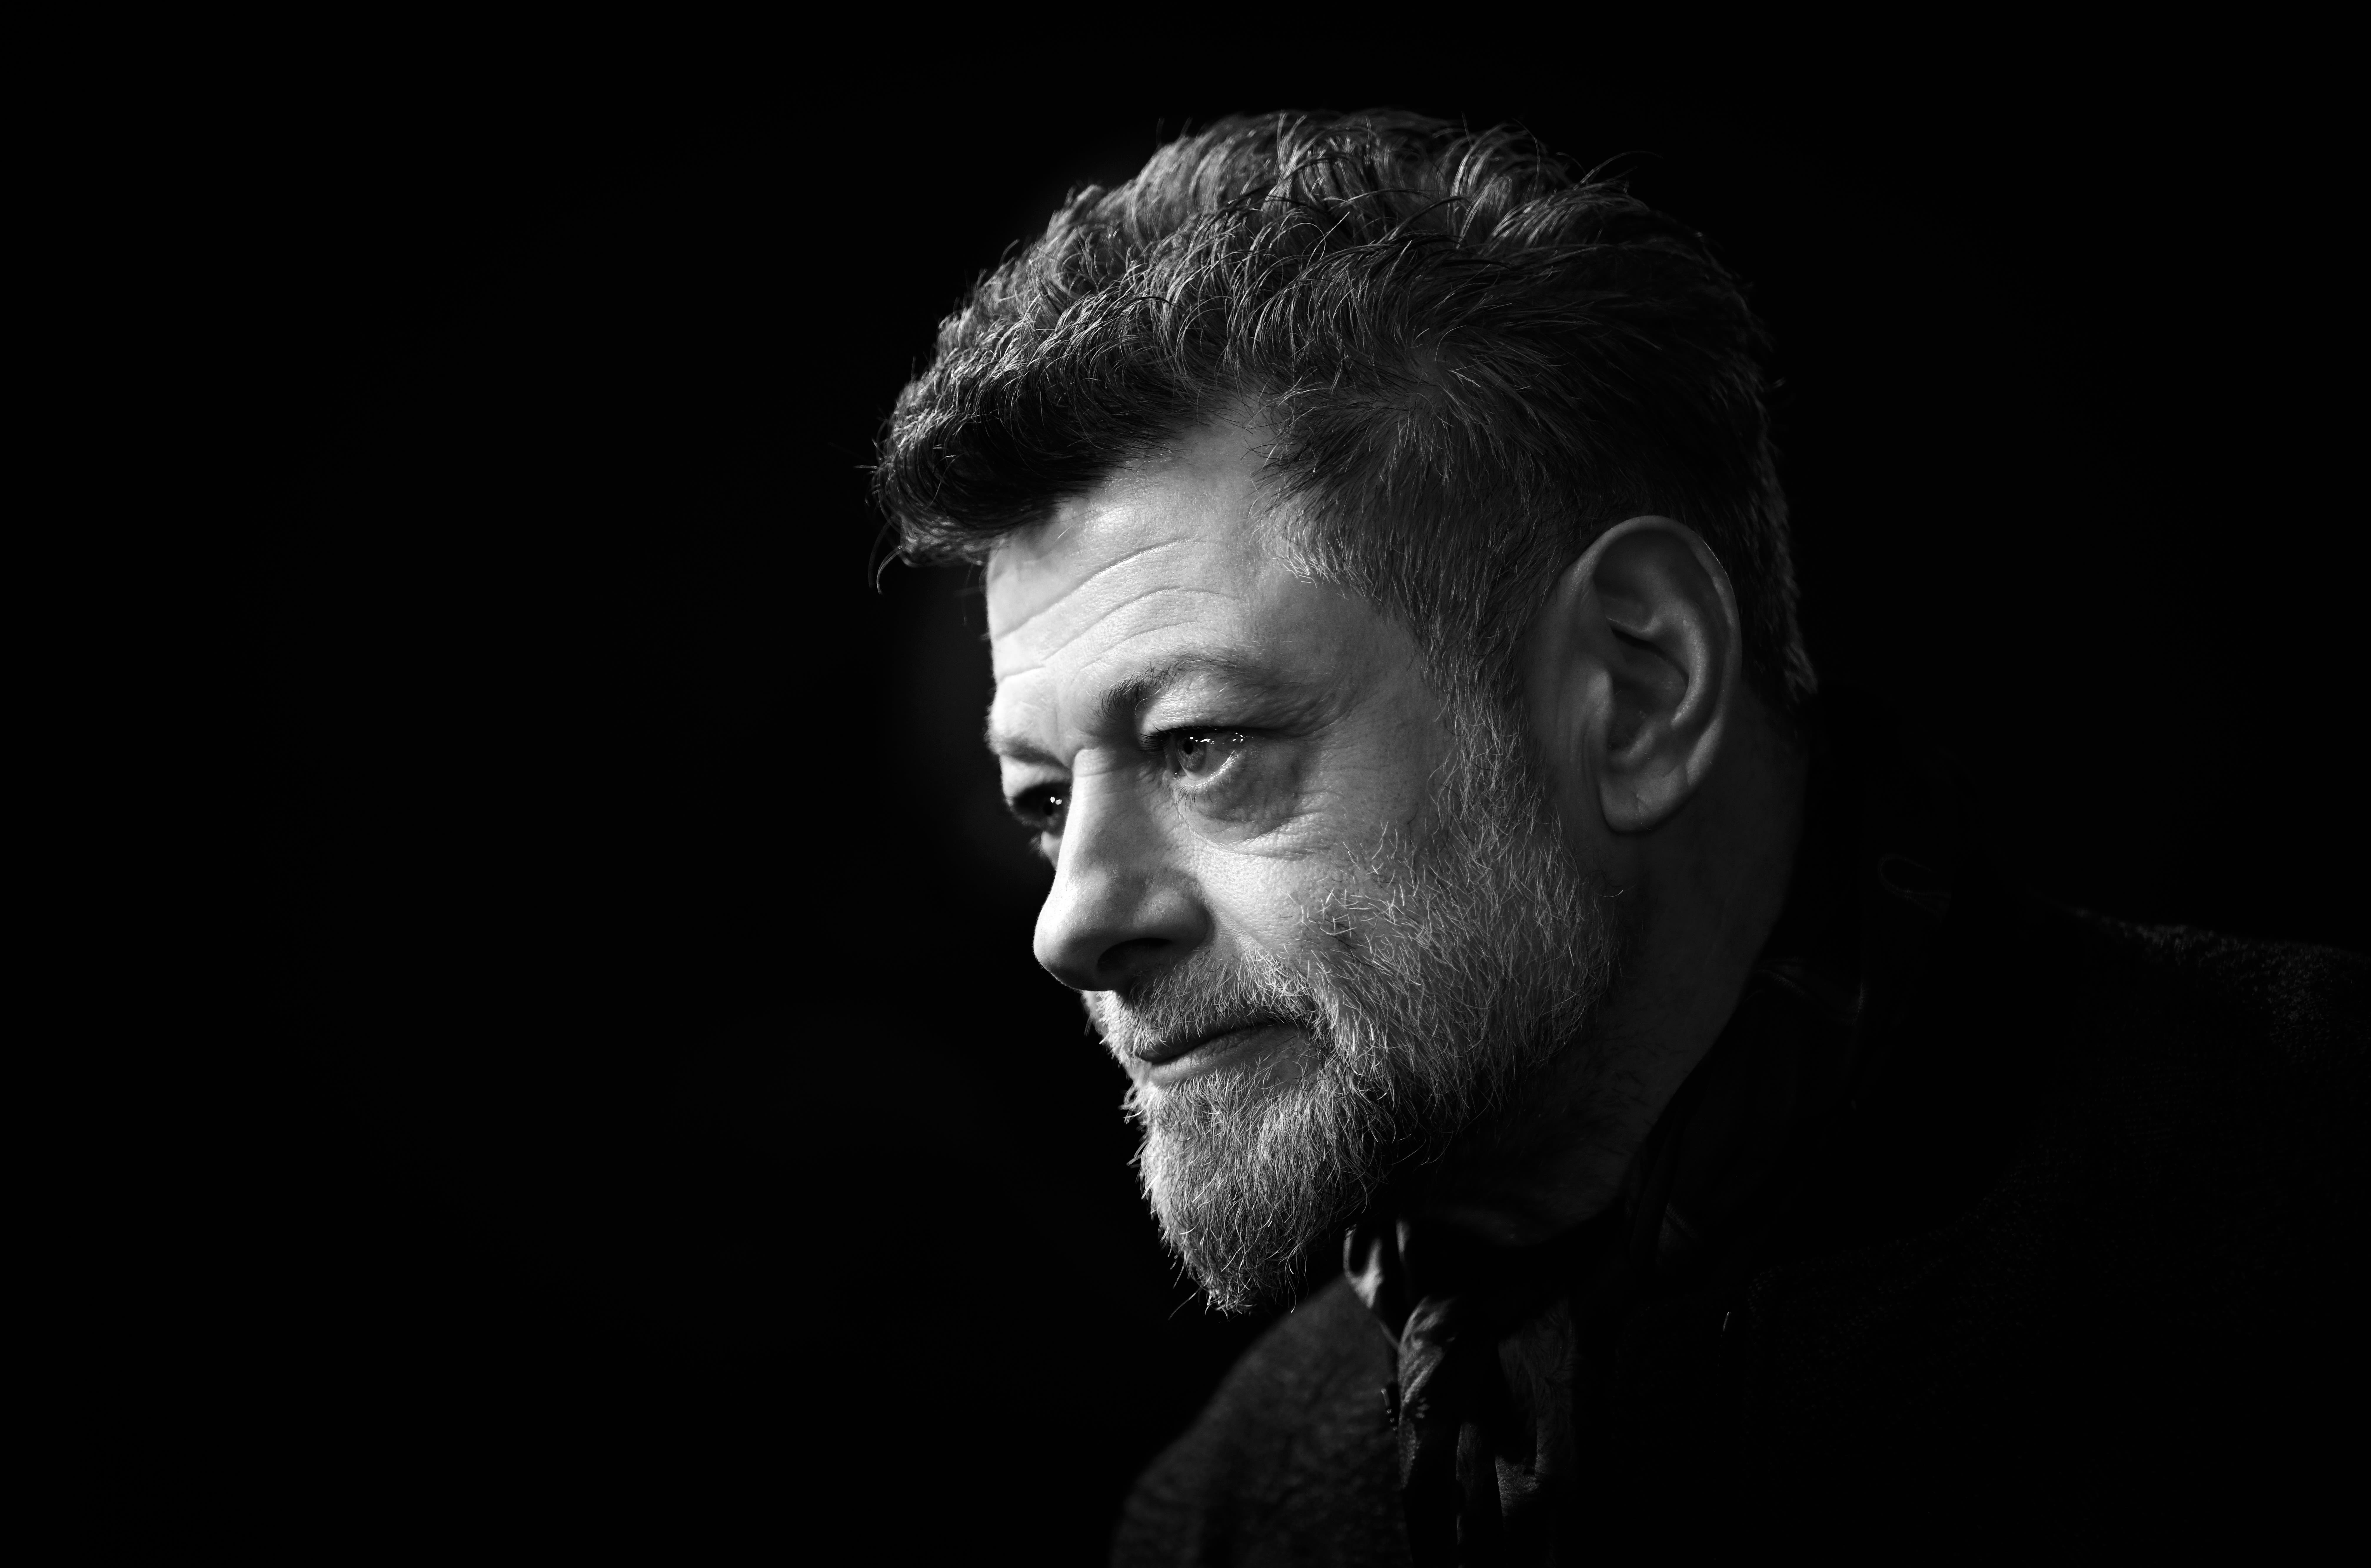 Andy Serkis To Play Himmler Opposite Woody Harrelson In ‘The Man With The Miraculous Hands’; SND Boards For Cannes...